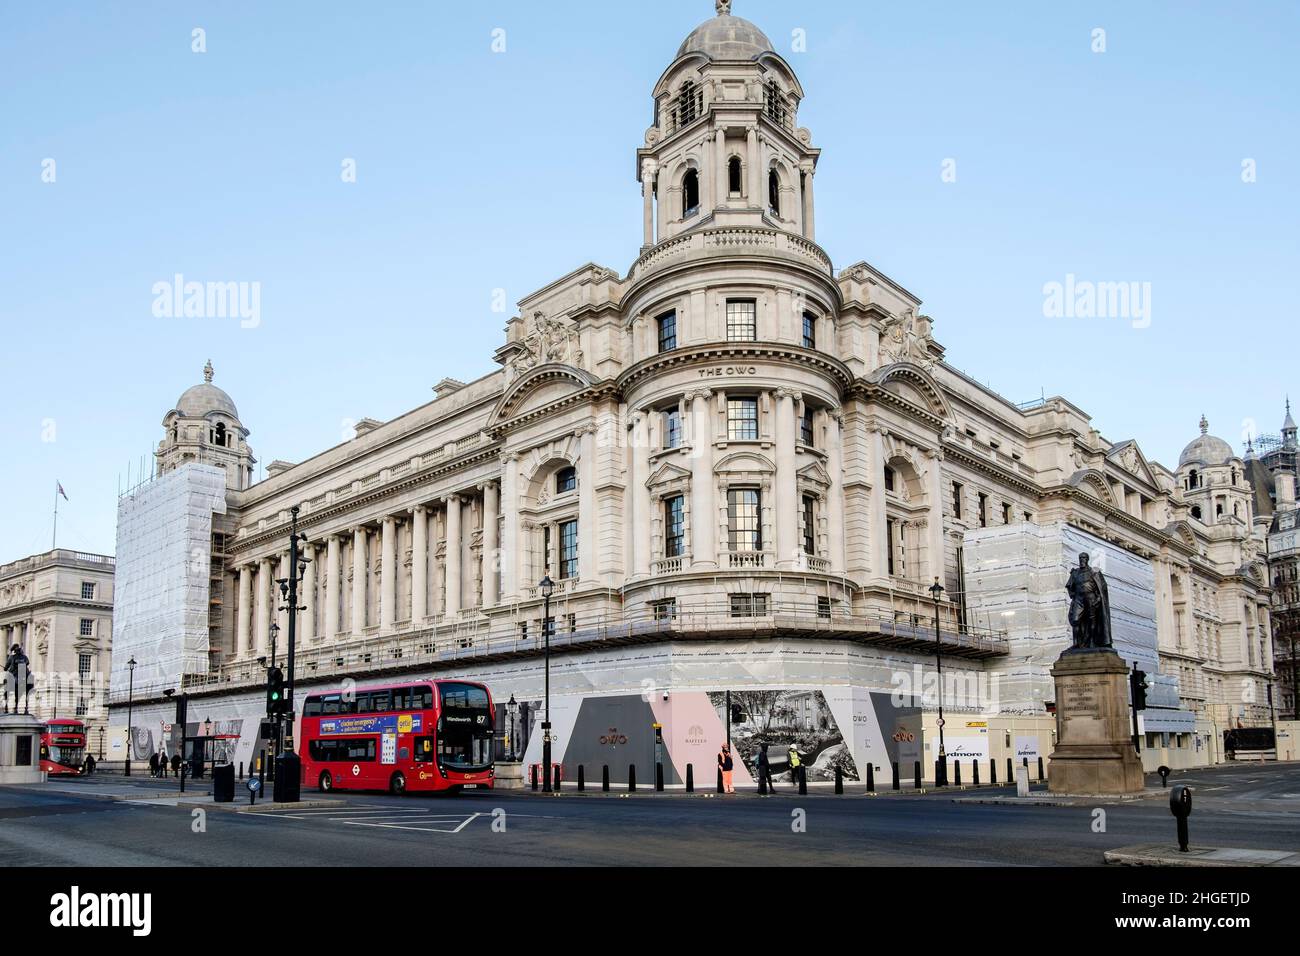 The OWO Residences development in the former British government War Office buildings scheduled for opening in 2022, Whitehall, London, UK. Stock Photo